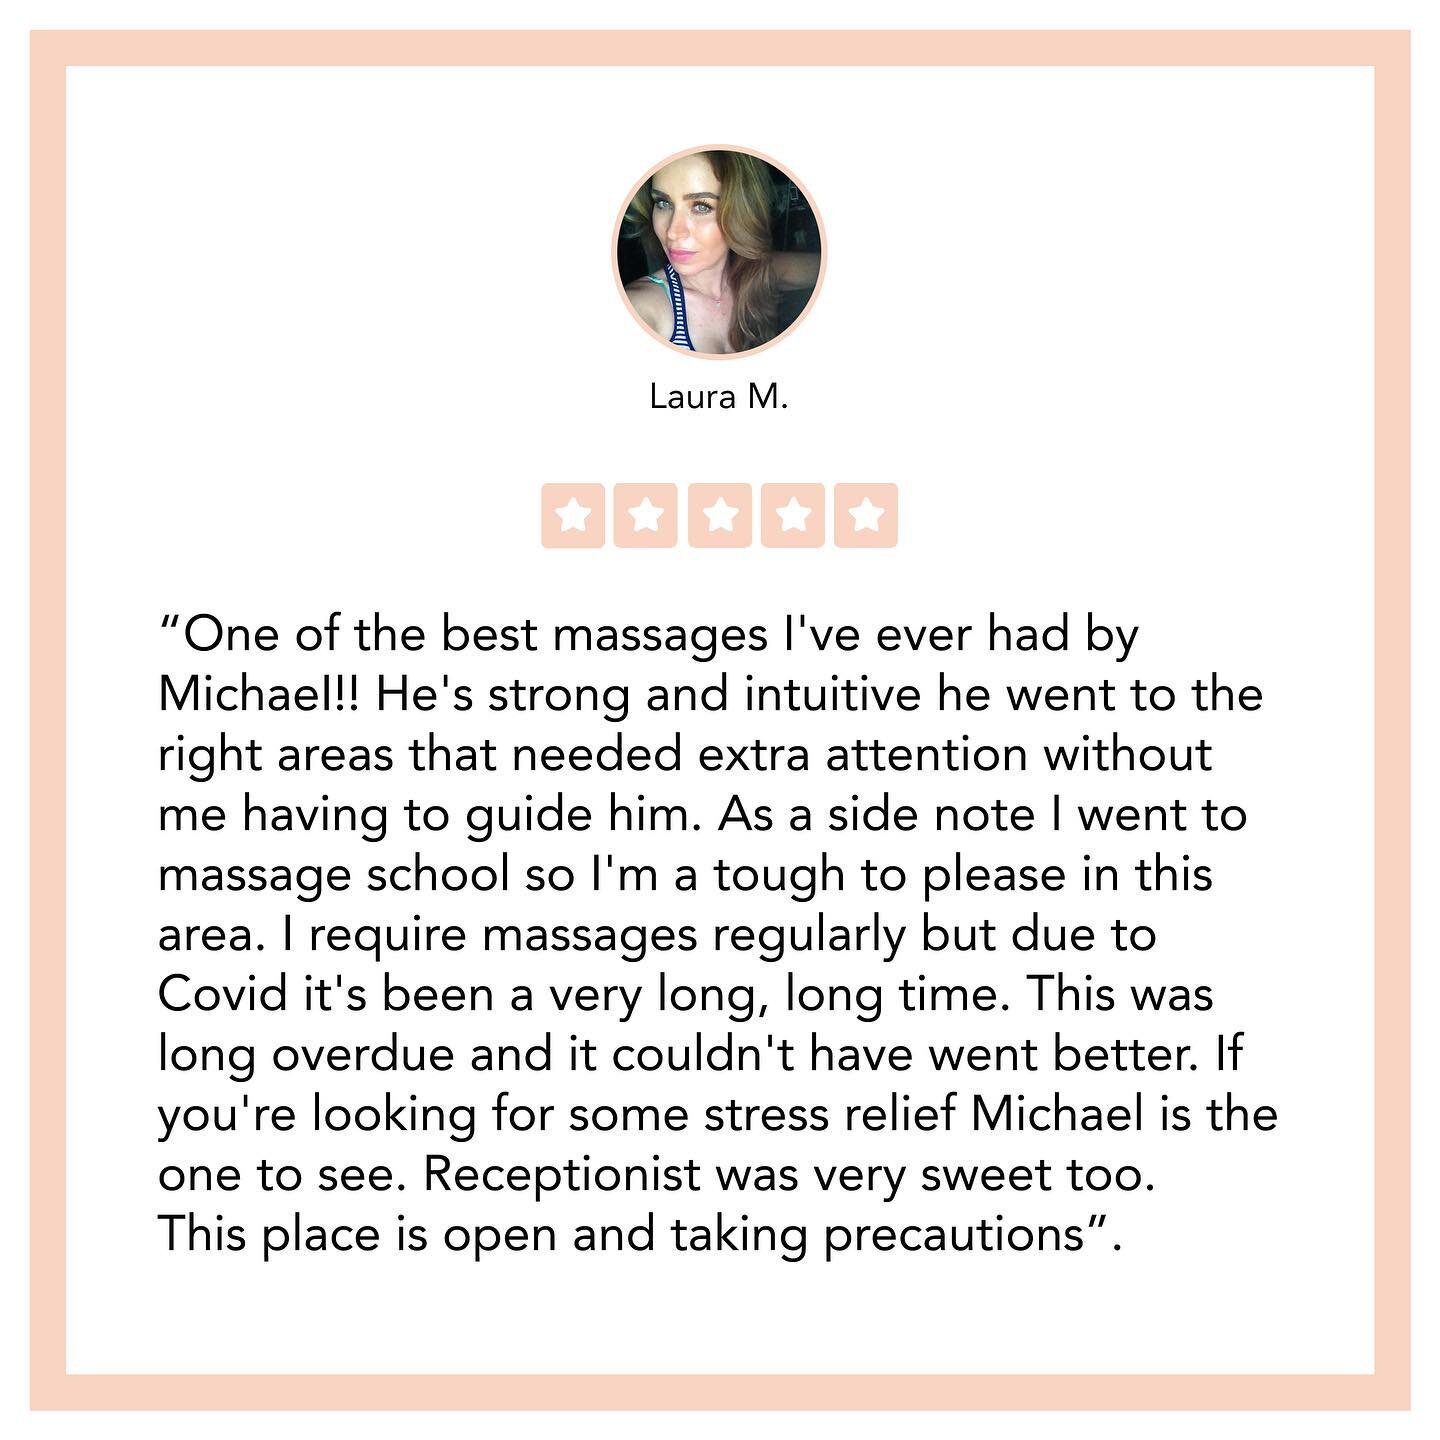 5 star reviews are not given. They are earned. We are proud to have been able to provide such service to our clients through out the years and continue to do so during these tough times.